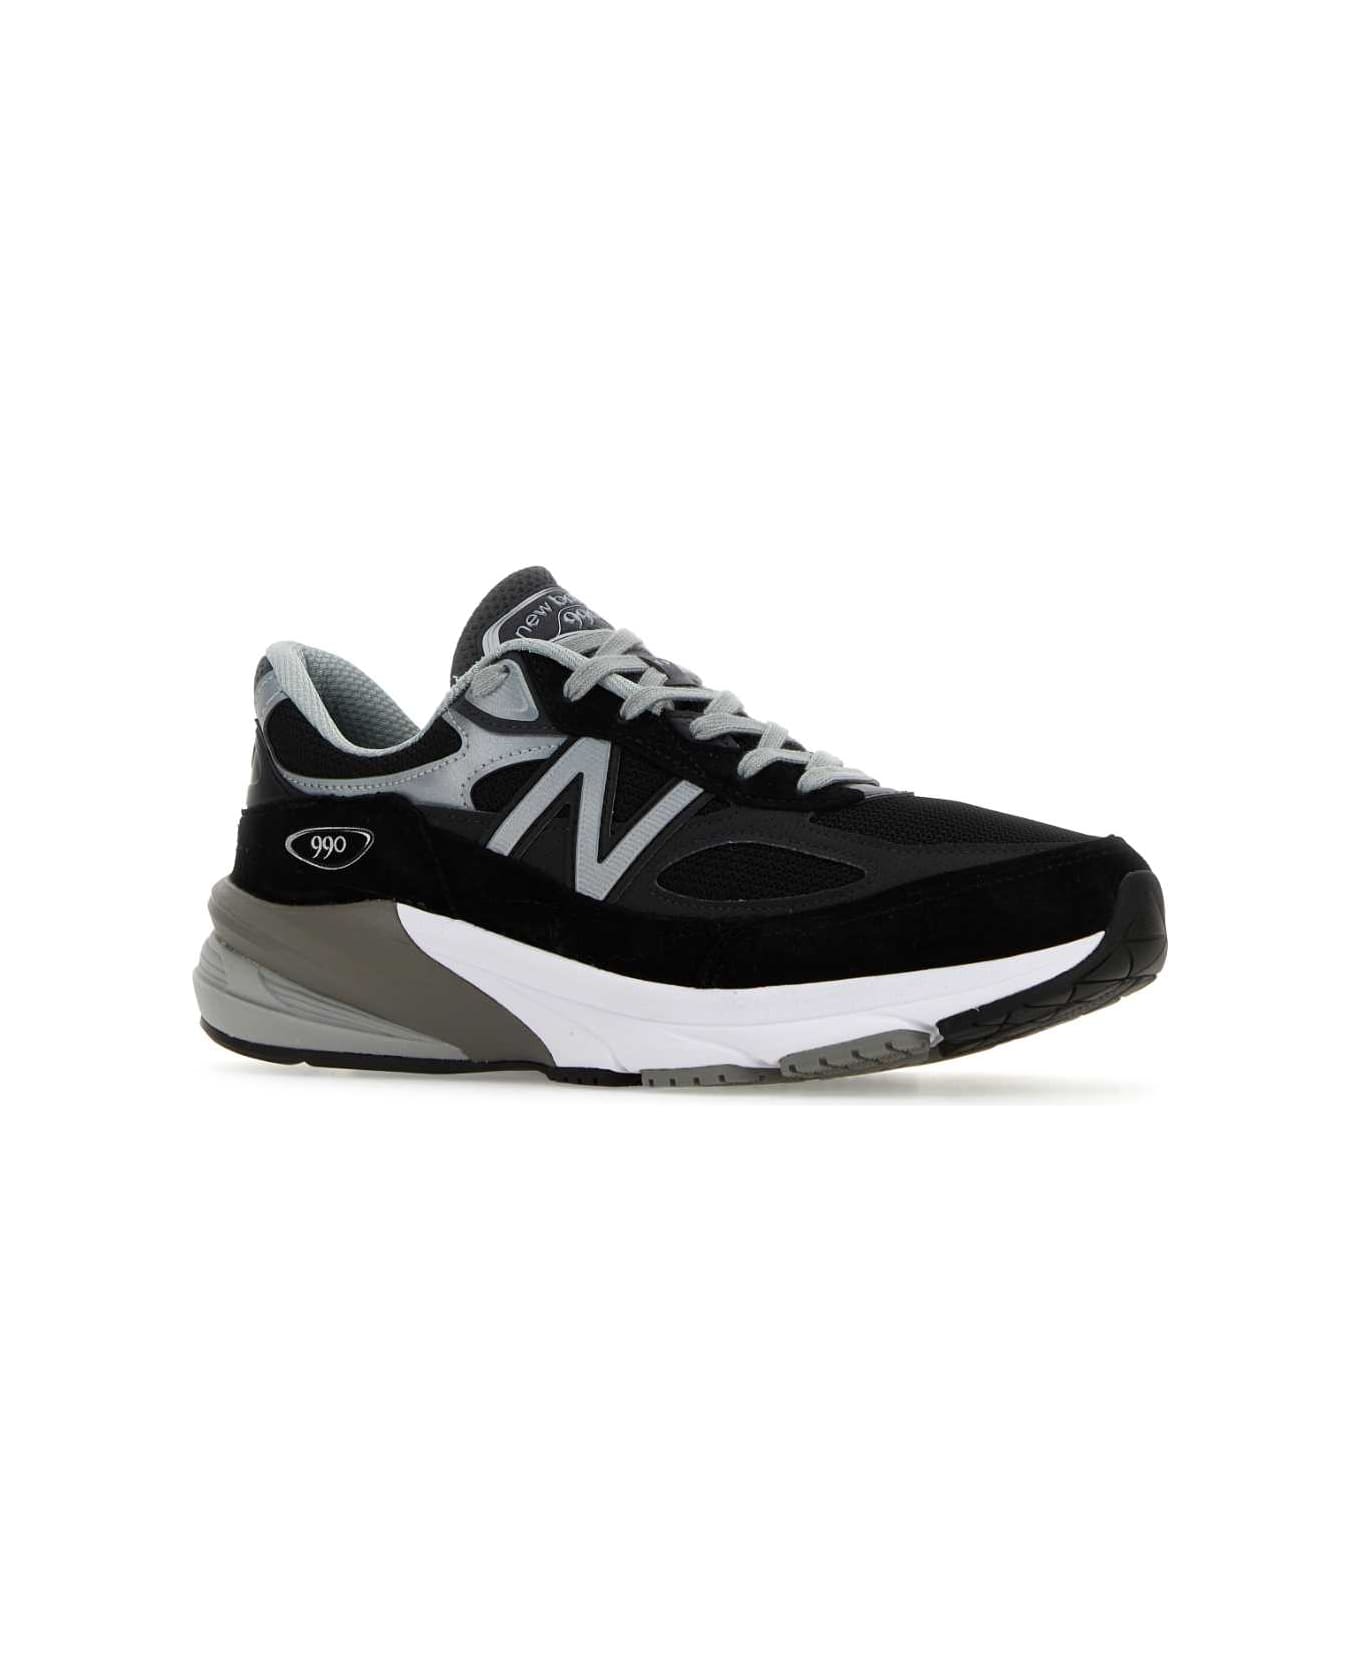 New Balance Multicolor Fabric And Suede 990v6 Sneakers - BLACK スニーカー